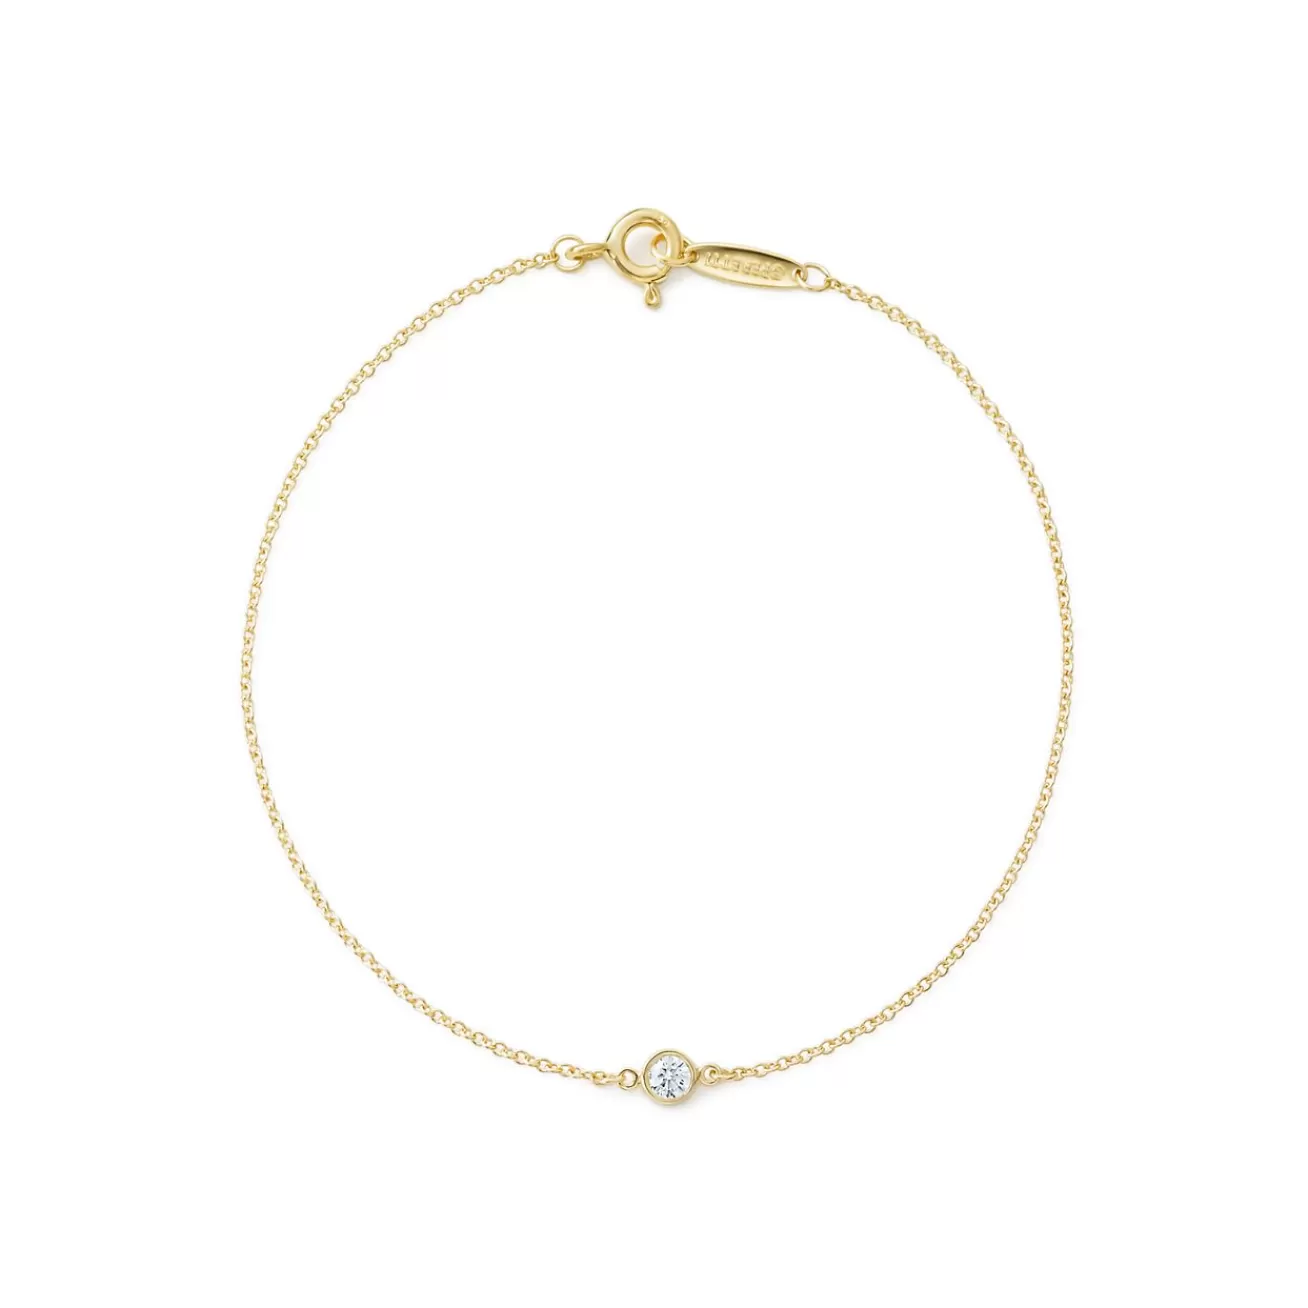 Tiffany & Co. Elsa Peretti® Diamonds by the Yard® bracelet in 18k gold with a diamond. | ^ Bracelets | Gifts for Her